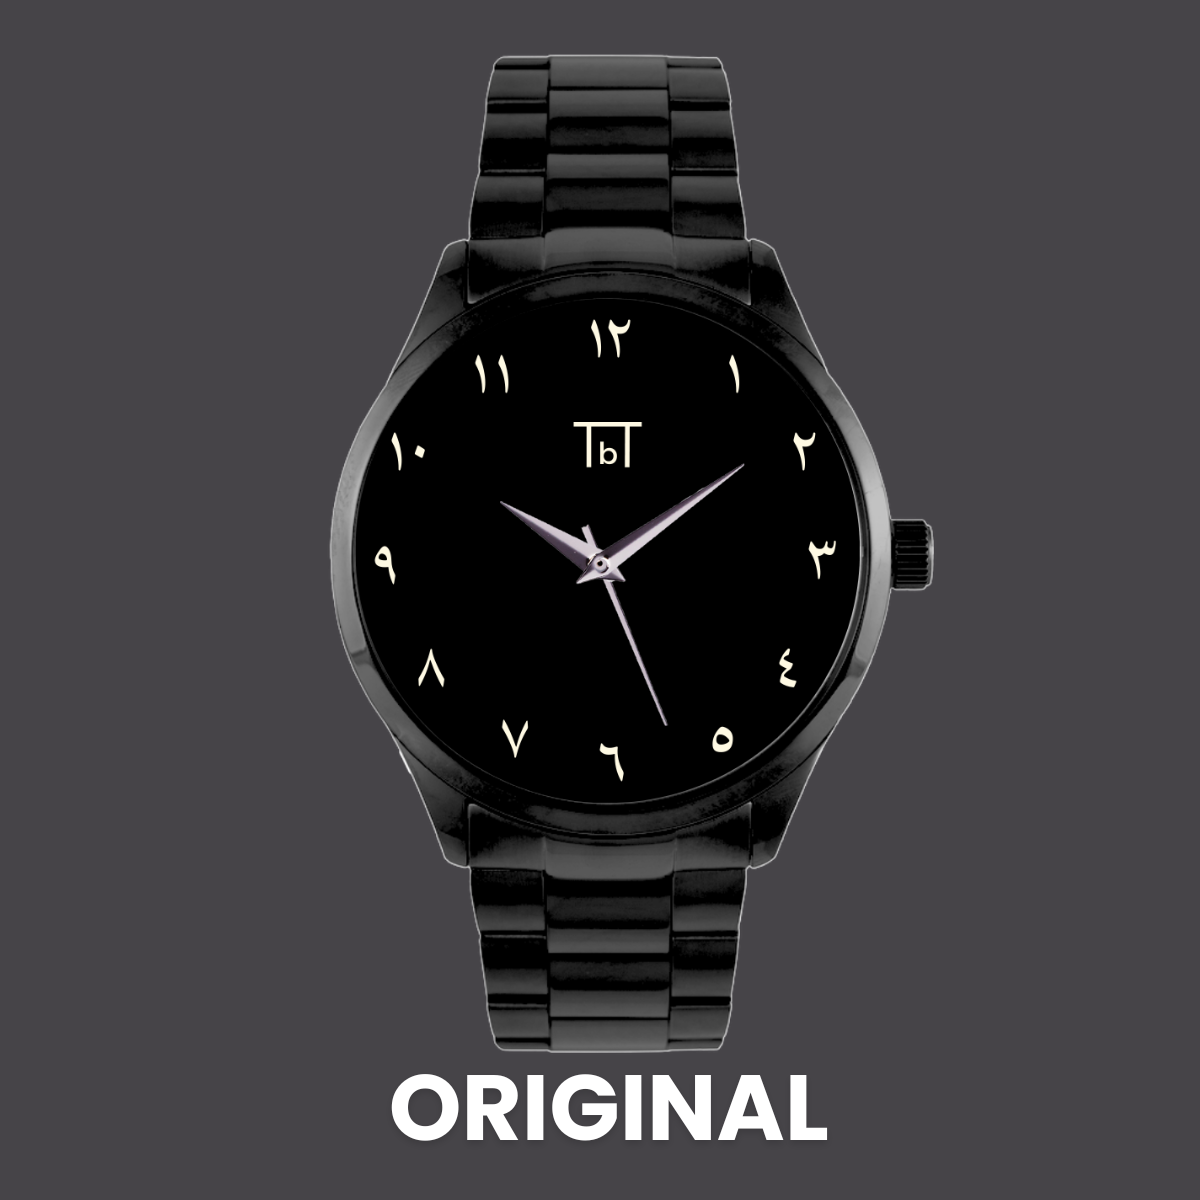 Arabic Dial Watch in Black Stainless Steel FOR HIM